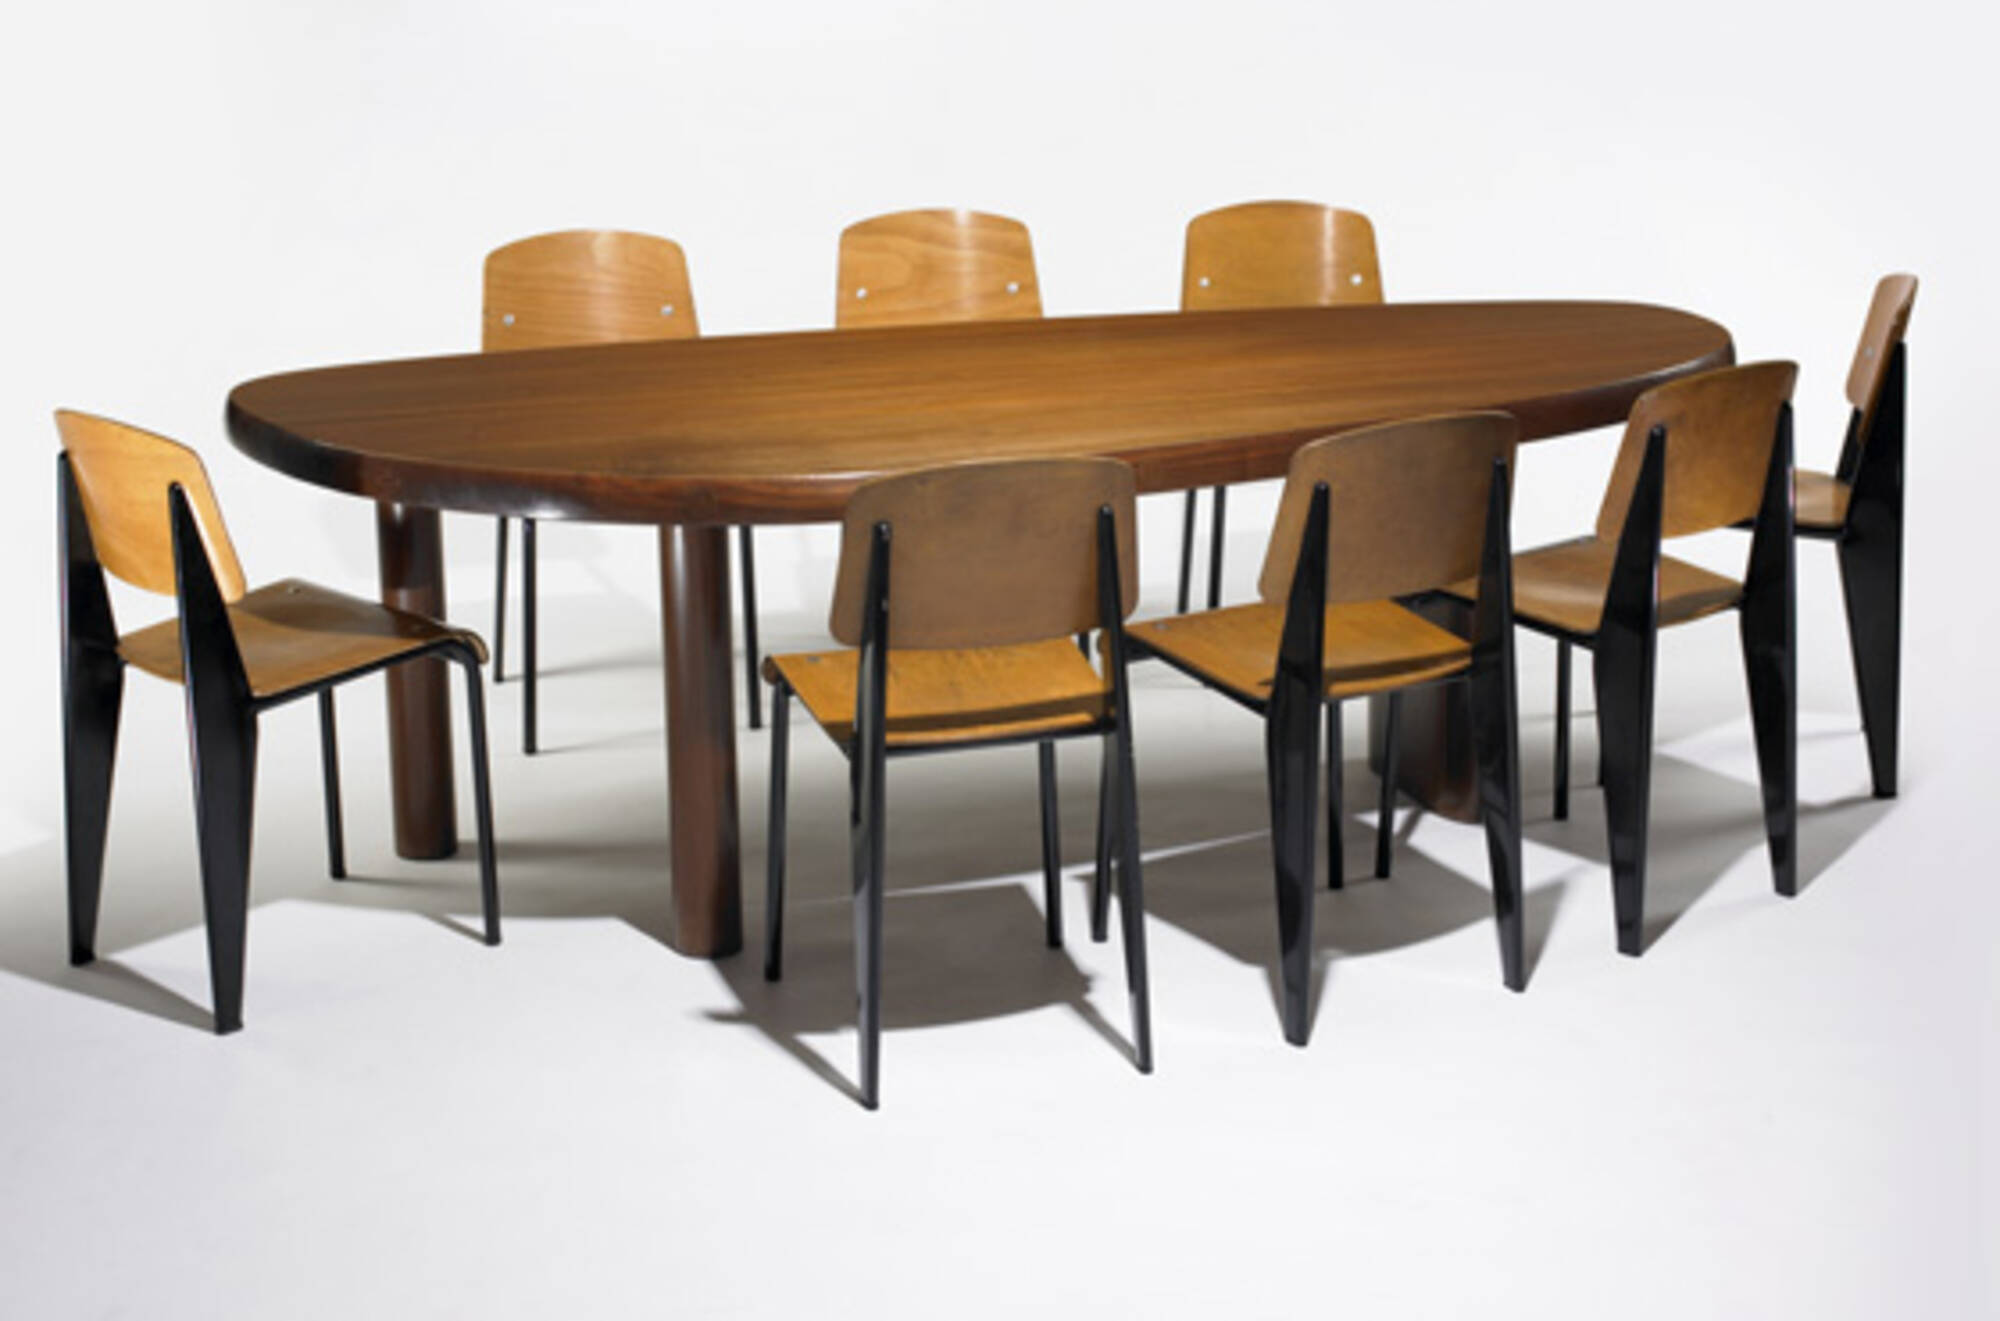 https://www.wright20.com/items/index/2000/248_1_important_design_day_1_may_2008_charlotte_perriand_forme_libre_dining_table__wright_auction.jpg?t=1687209453